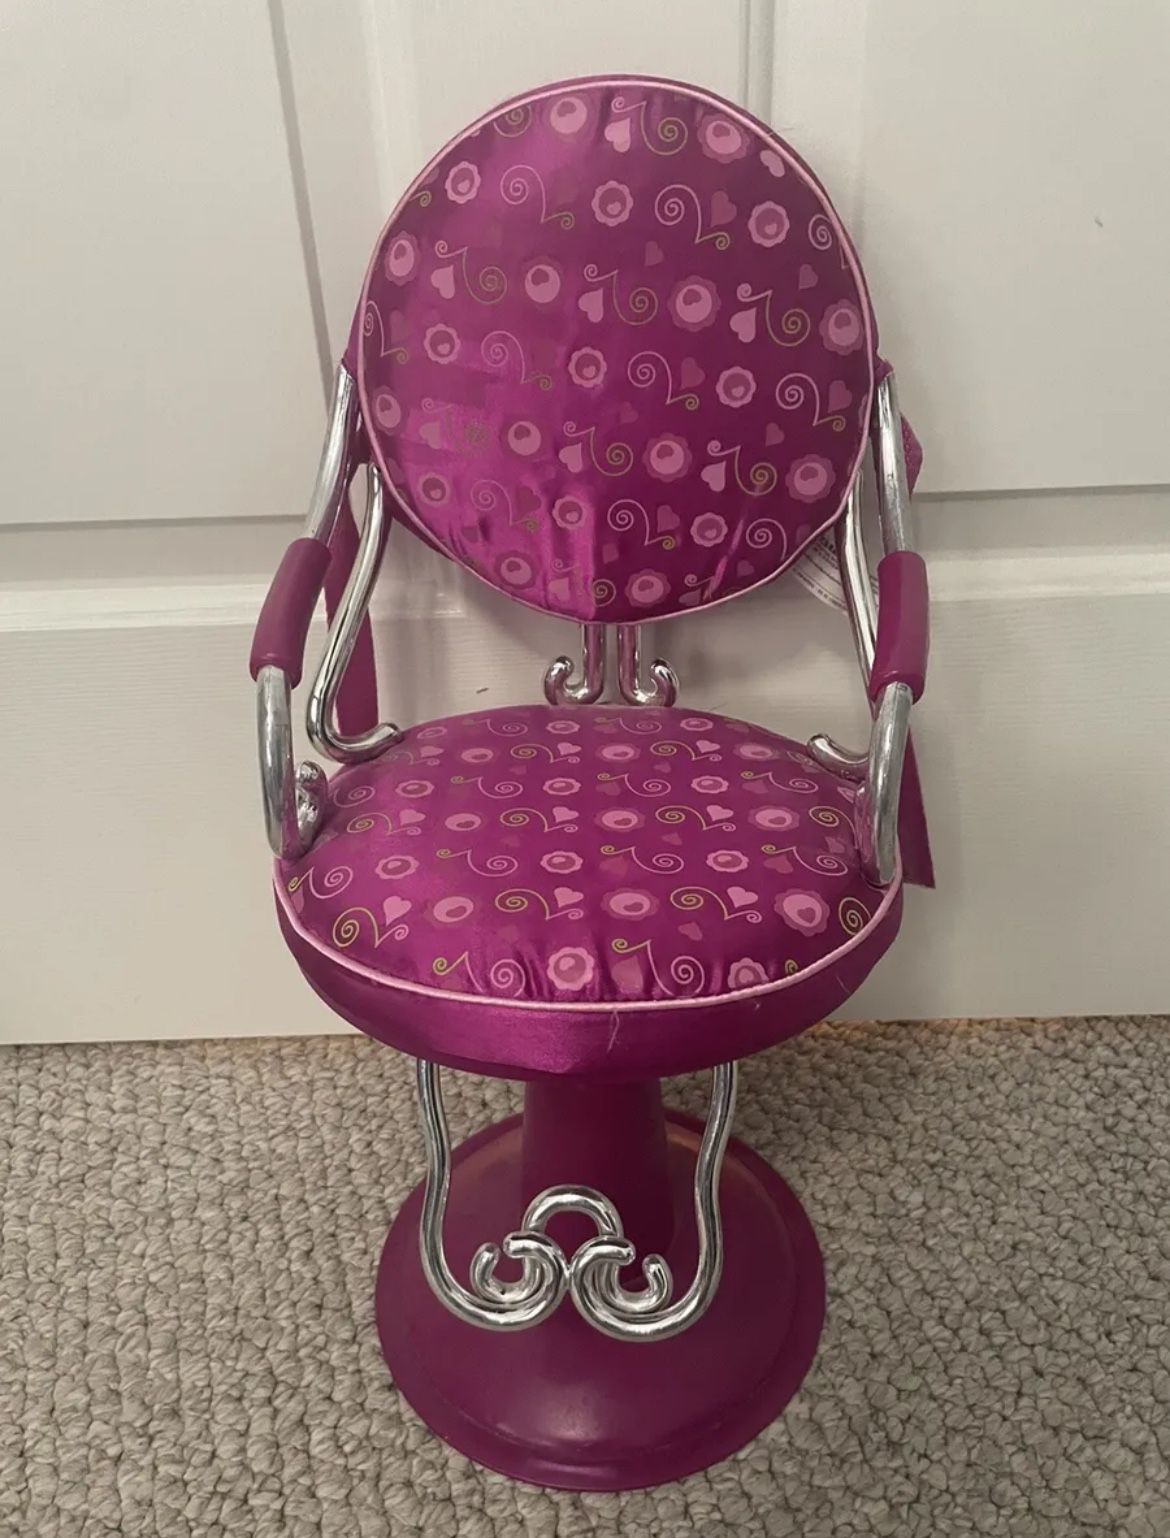 Our Generation by Battat Dark Pink Beauty Salon Chair for 18" American Girl doll